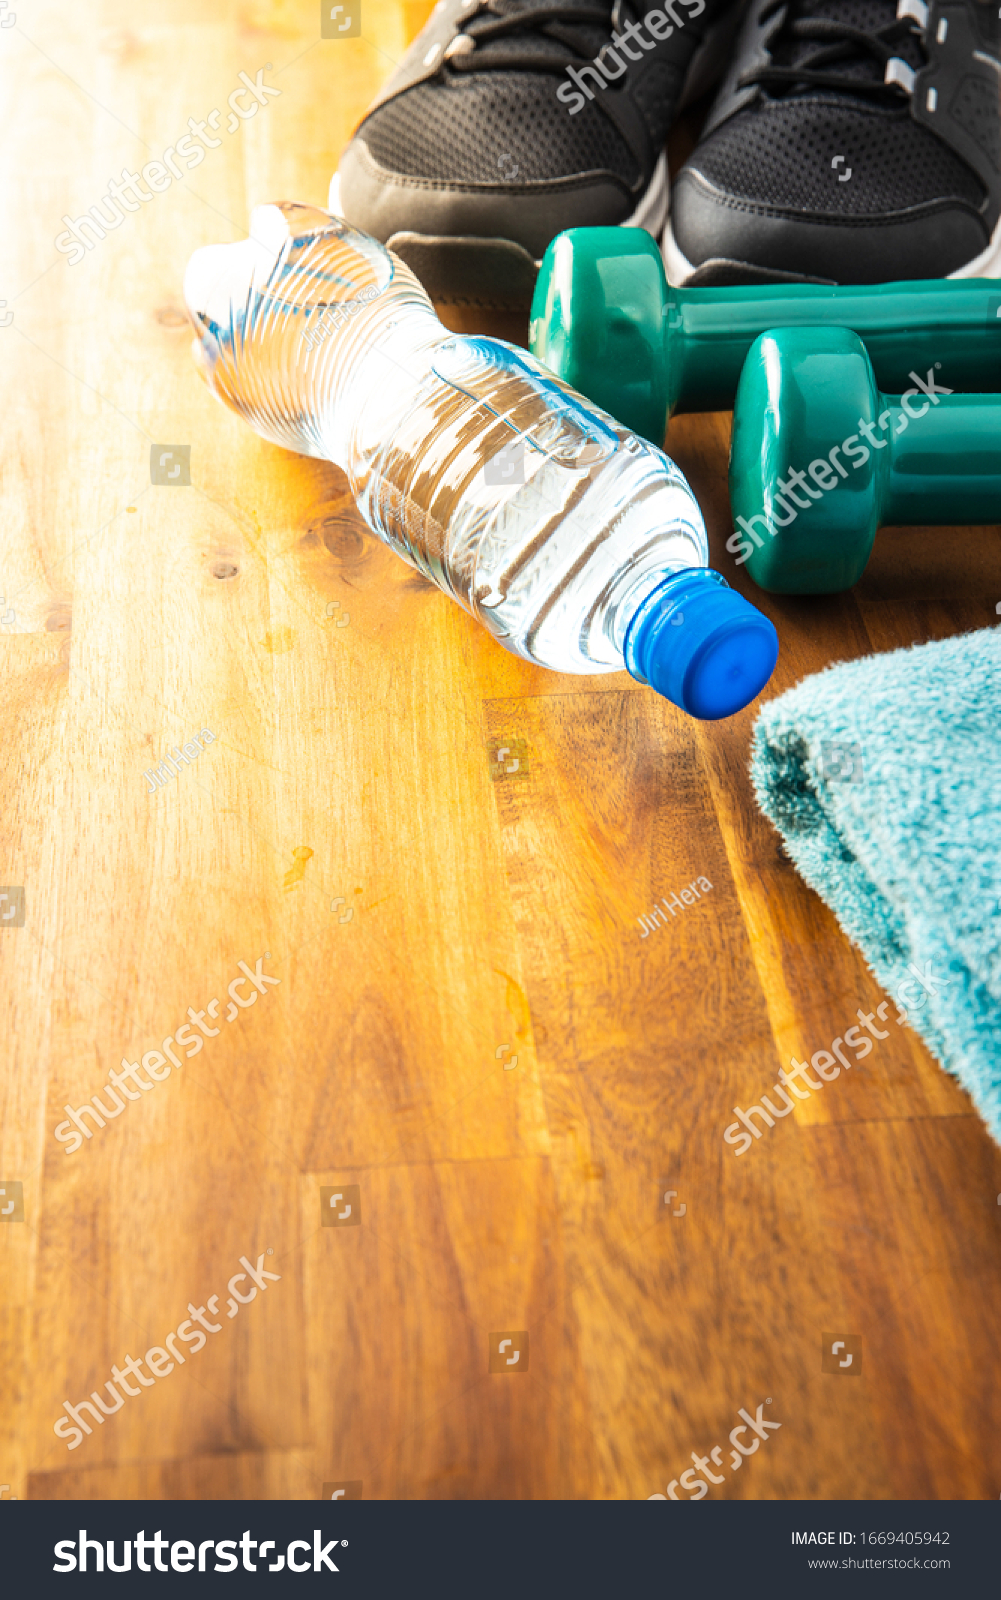 Fitness concept. Black sports shoes, dumbbell and bottle of water on wooden floor. #1669405942